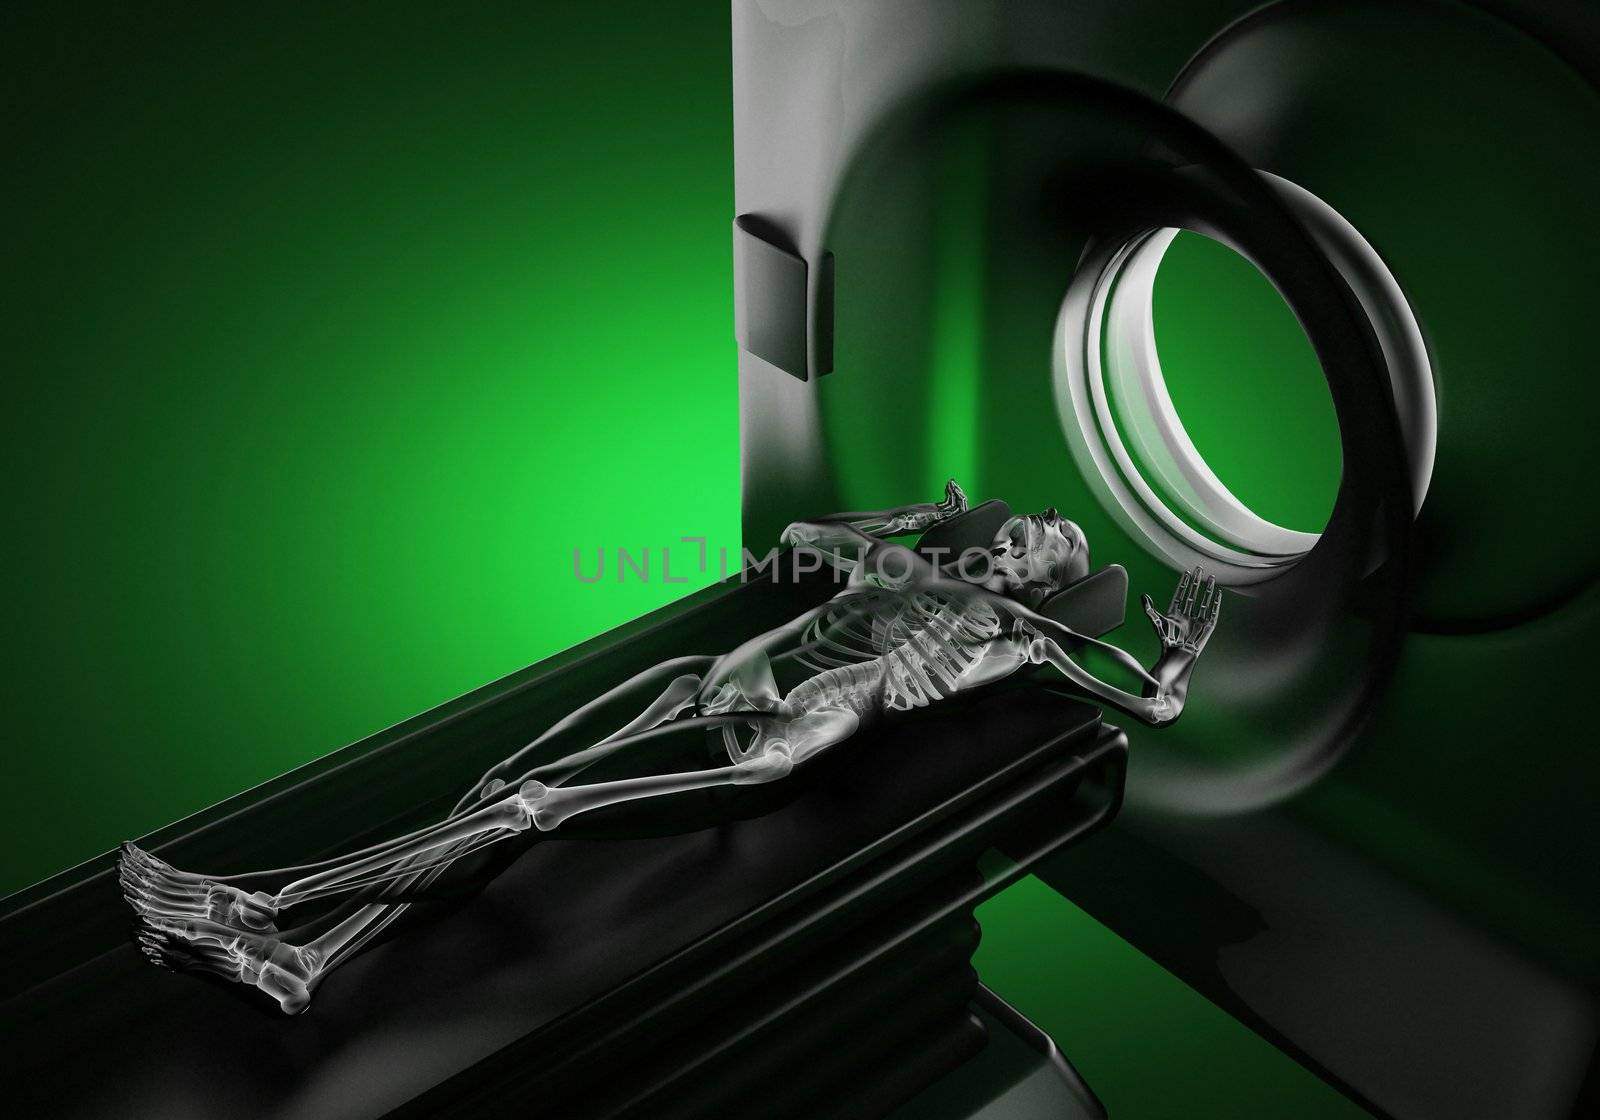 MRI examination made in 3D graphics